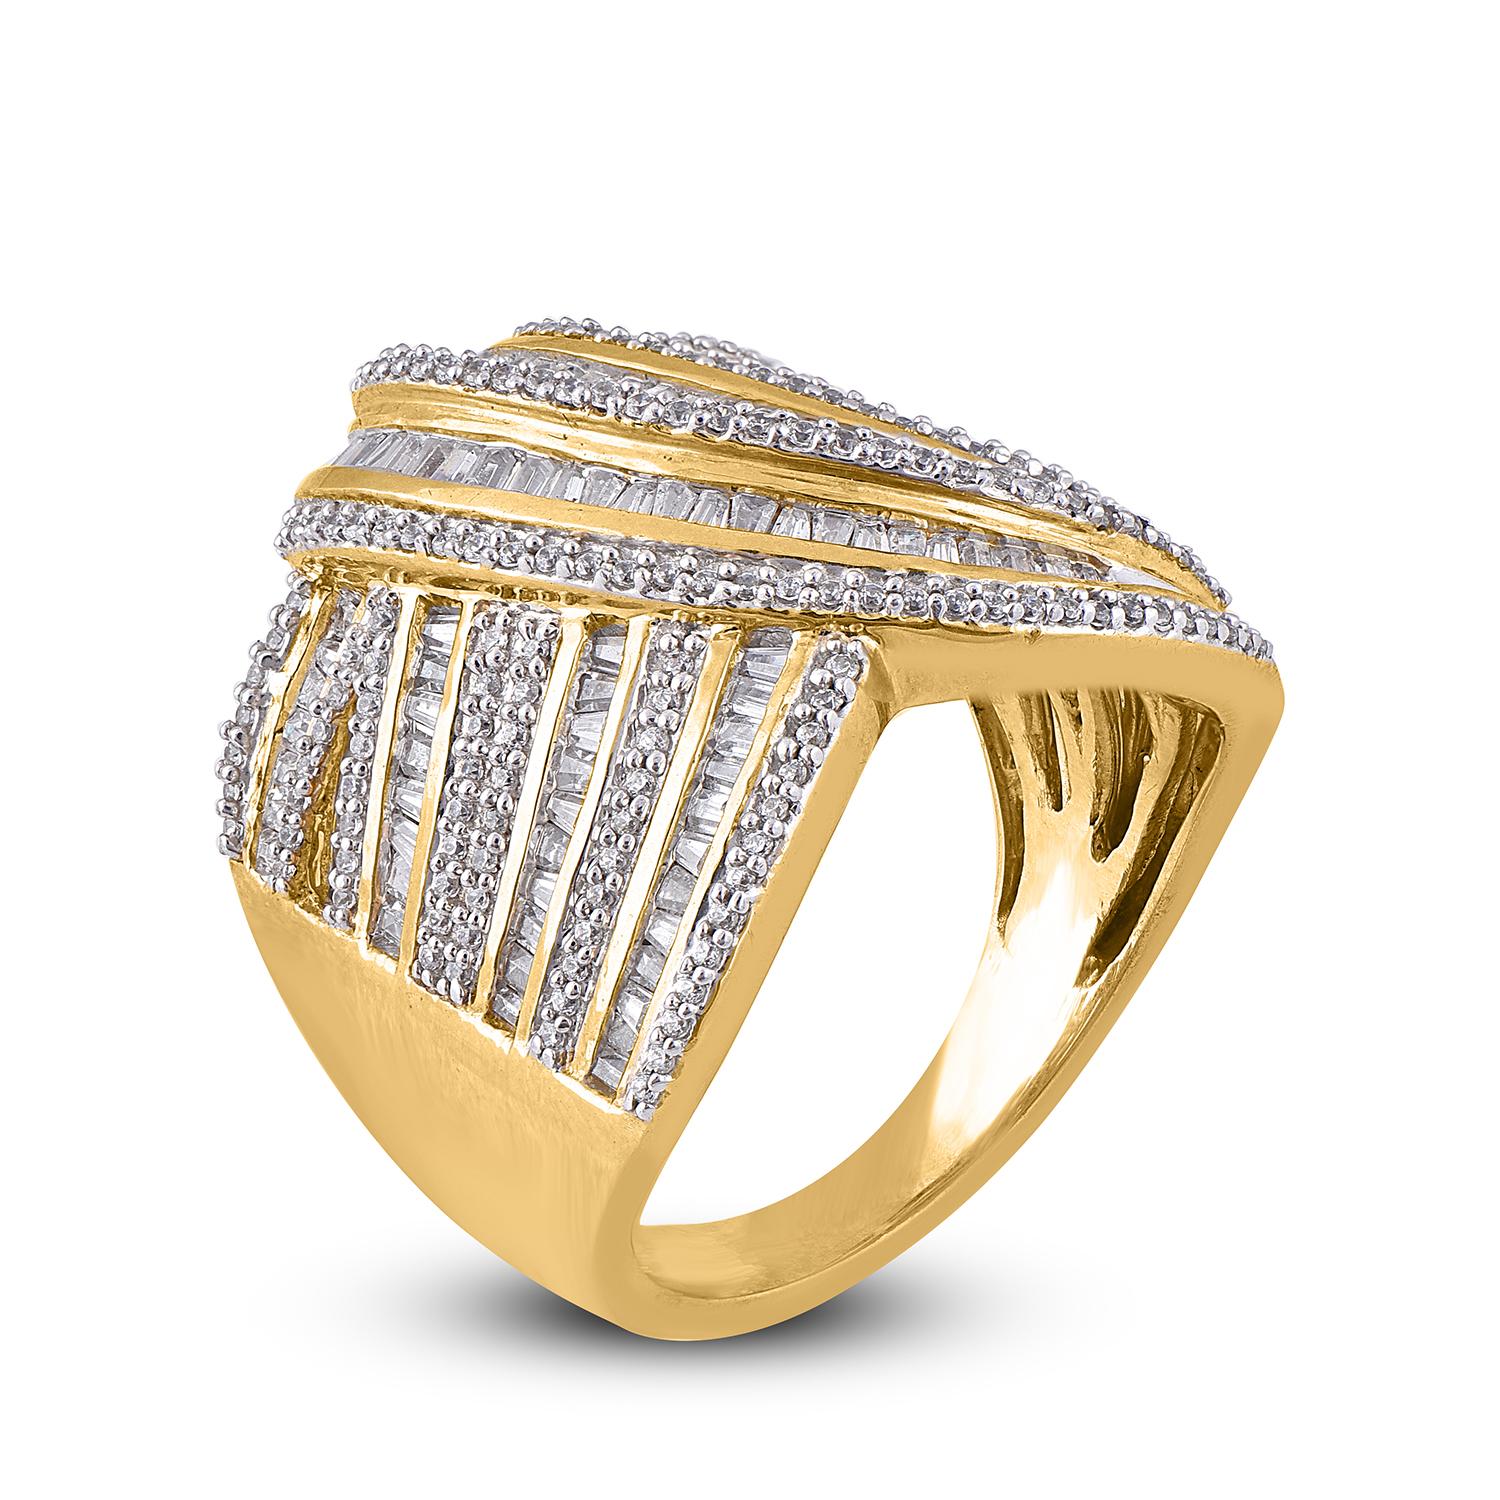 This will melt her heart all over again, Inspire your loved one. this diamond ring is beautifully crafted in 14 Karat Yellow gold studded with sparkling 186 round diamonds and 111 Bauguette diamond in secured with Channel & Prong setting. The